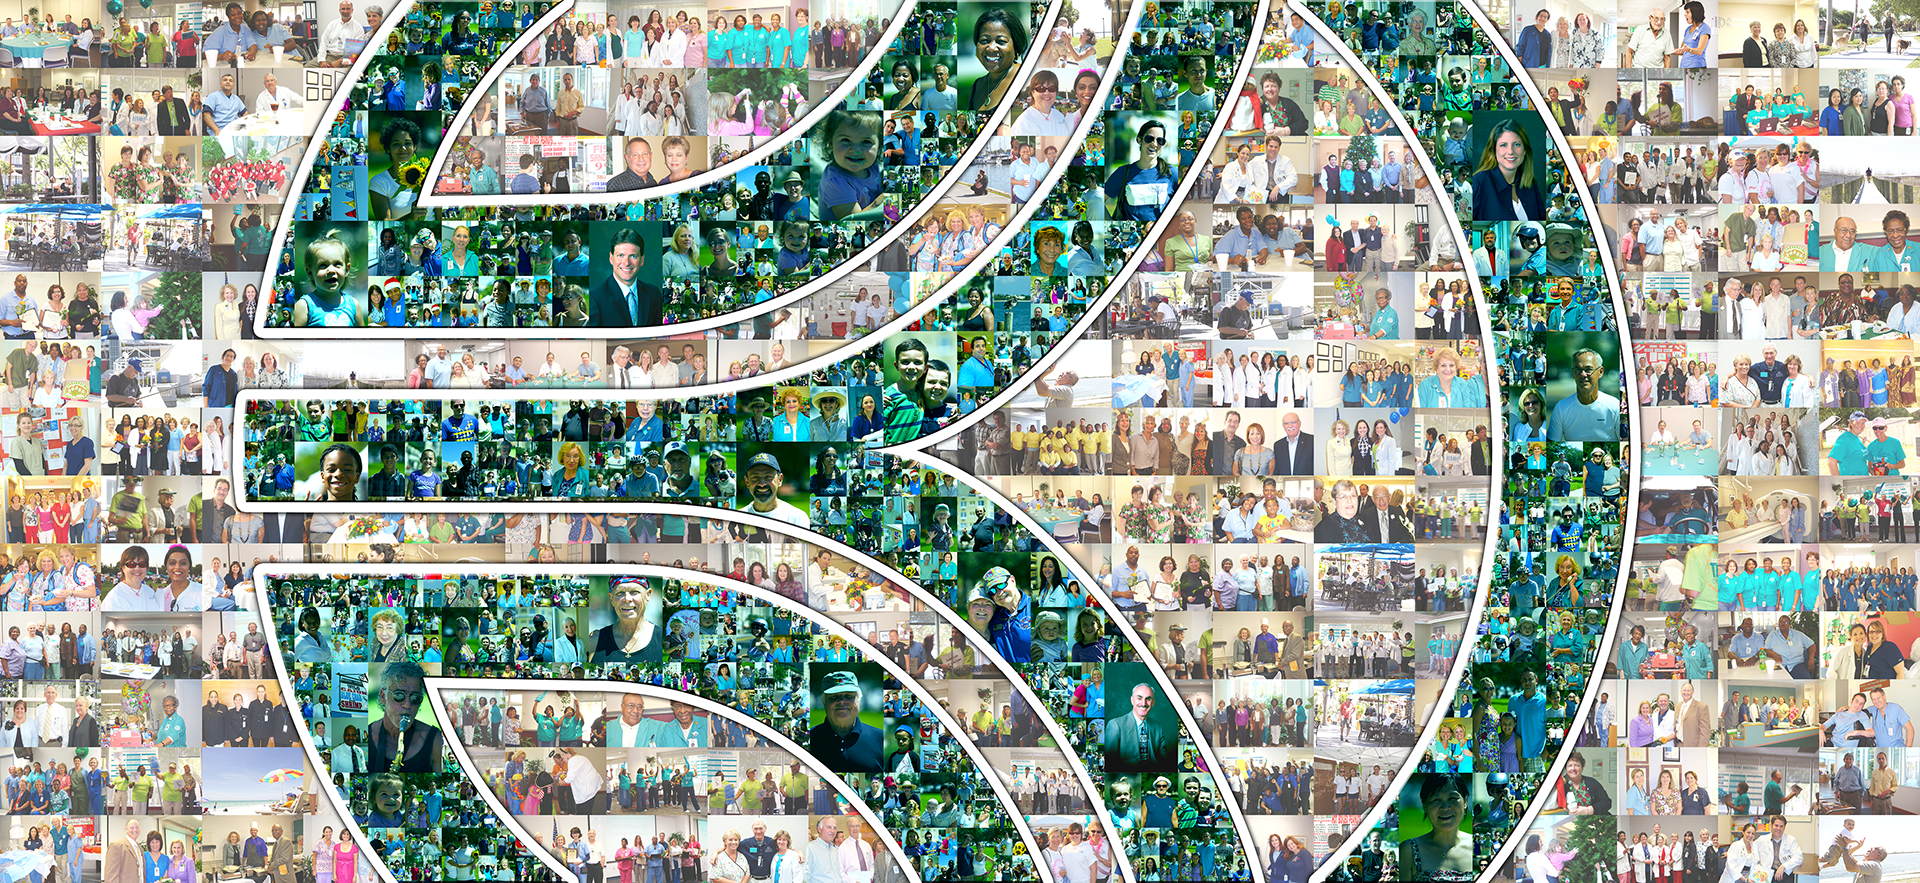 photo mosaic A multi-size cell billboard advertisement using over 600 photos of Bayfront Health System employees